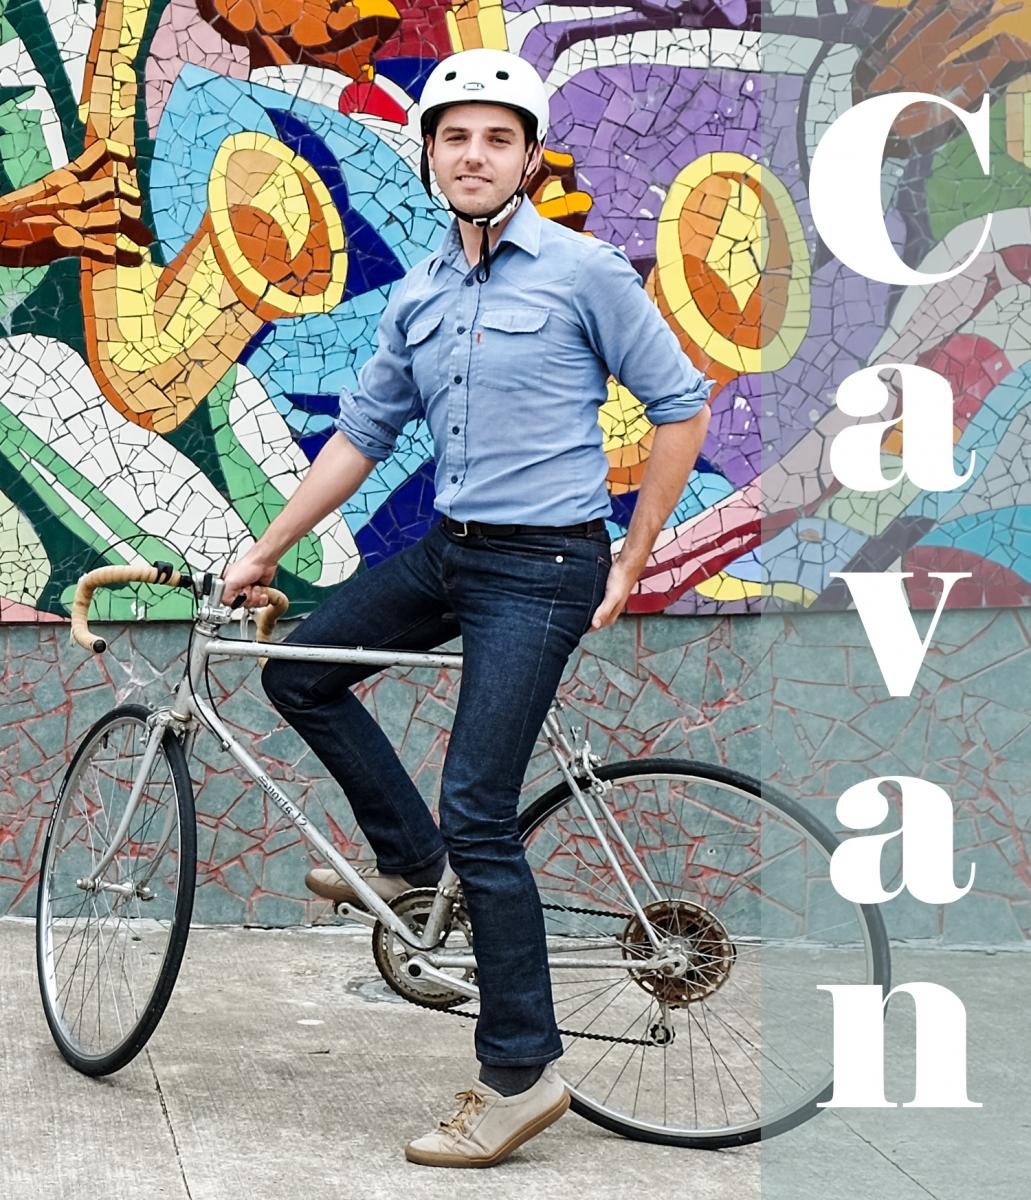 Text: Cavan, pictureof Cavan on a bike with colorful mural in background.